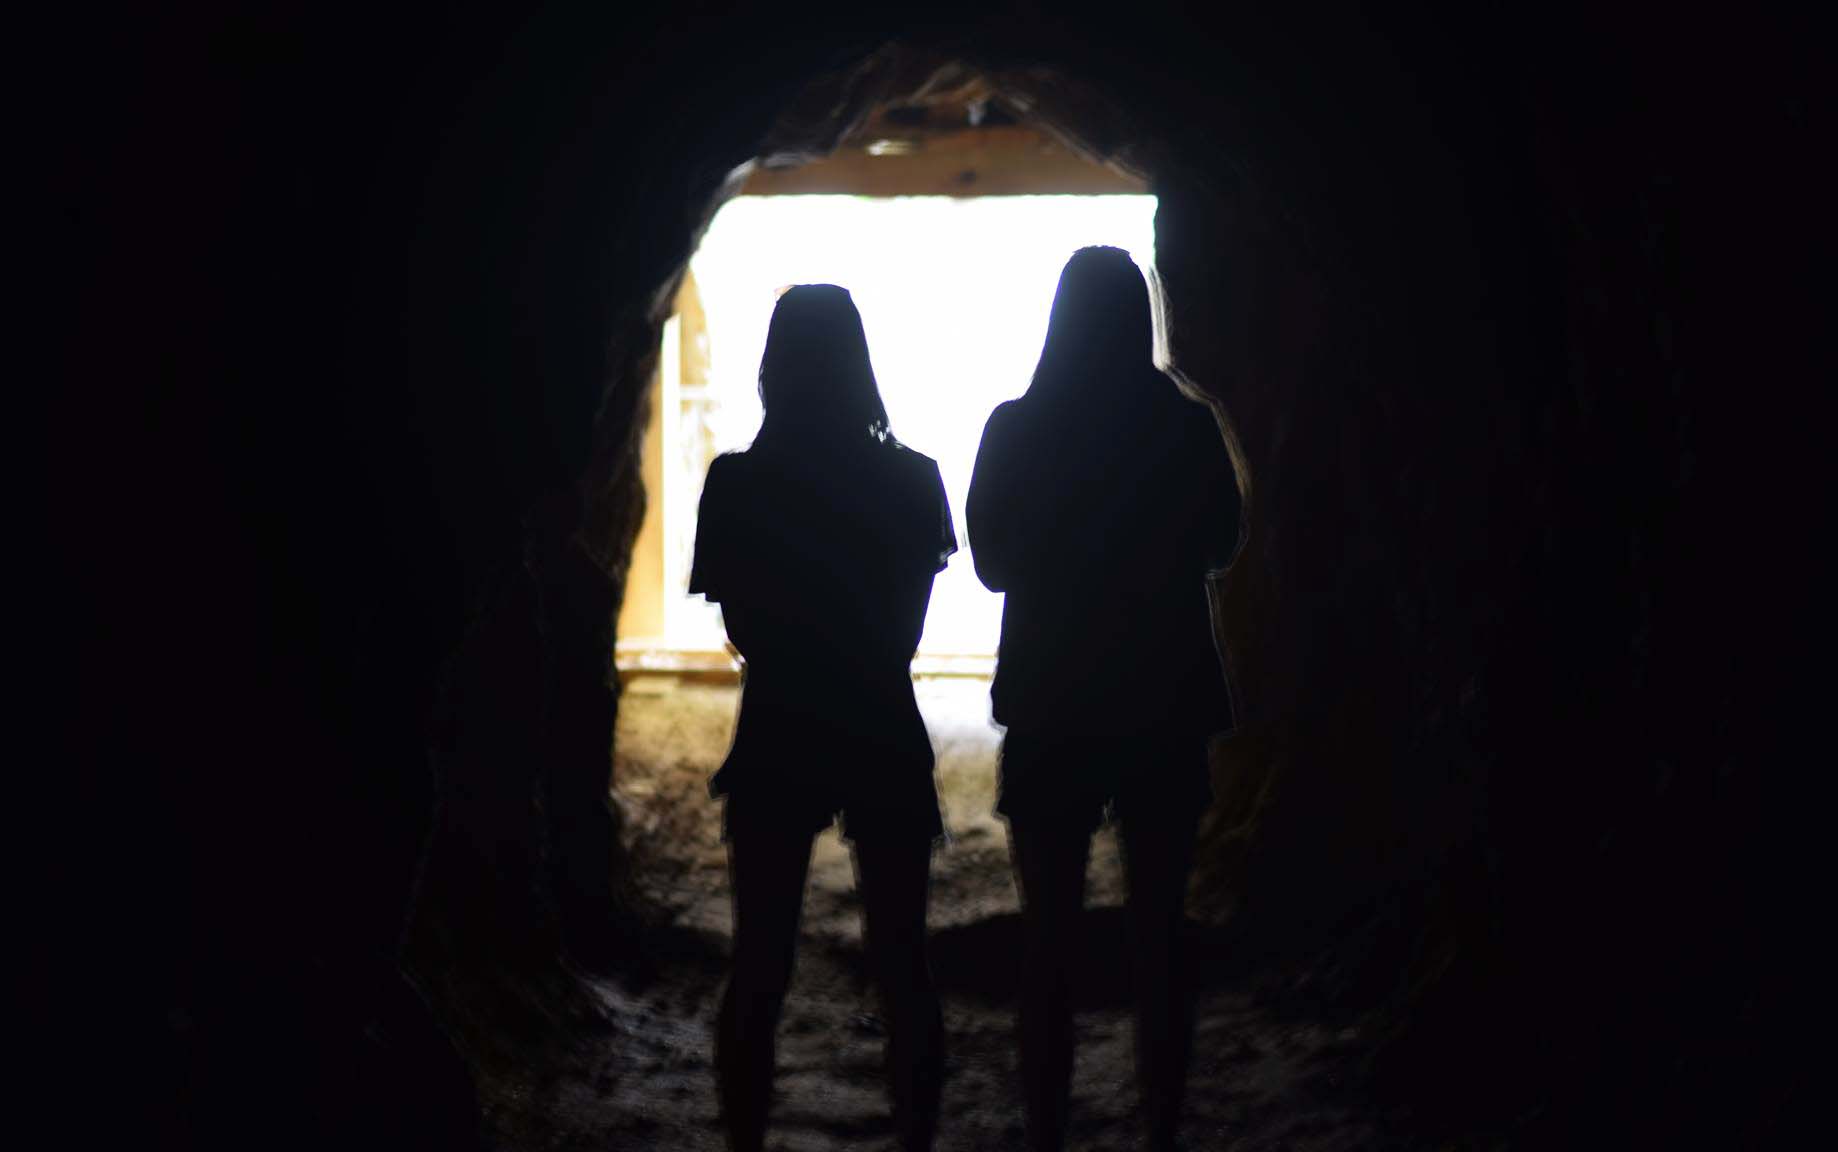 Though Ashley is still in NZ's newest lockdown, there is light at the end of the tunnel. Picture of two silhouetted figures in a tunnel with light streaming in behind them.